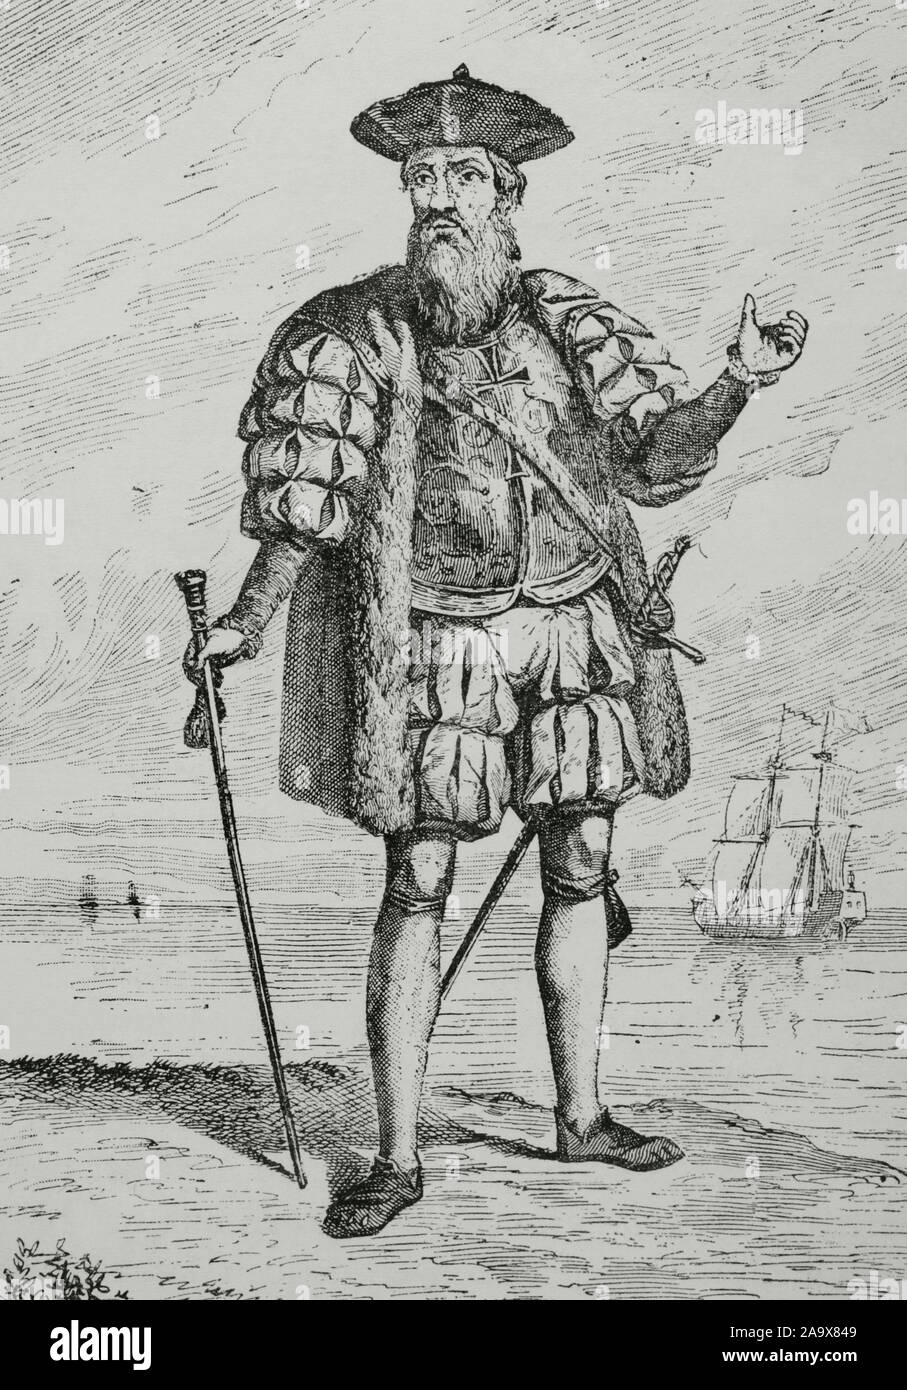 Vasco da Gama, 1st Count of Vidigueira (1460-1524). Portuguese explorer. He was the first European to reach India by sea. Engraving. Museo Militar, 1883. Stock Photo